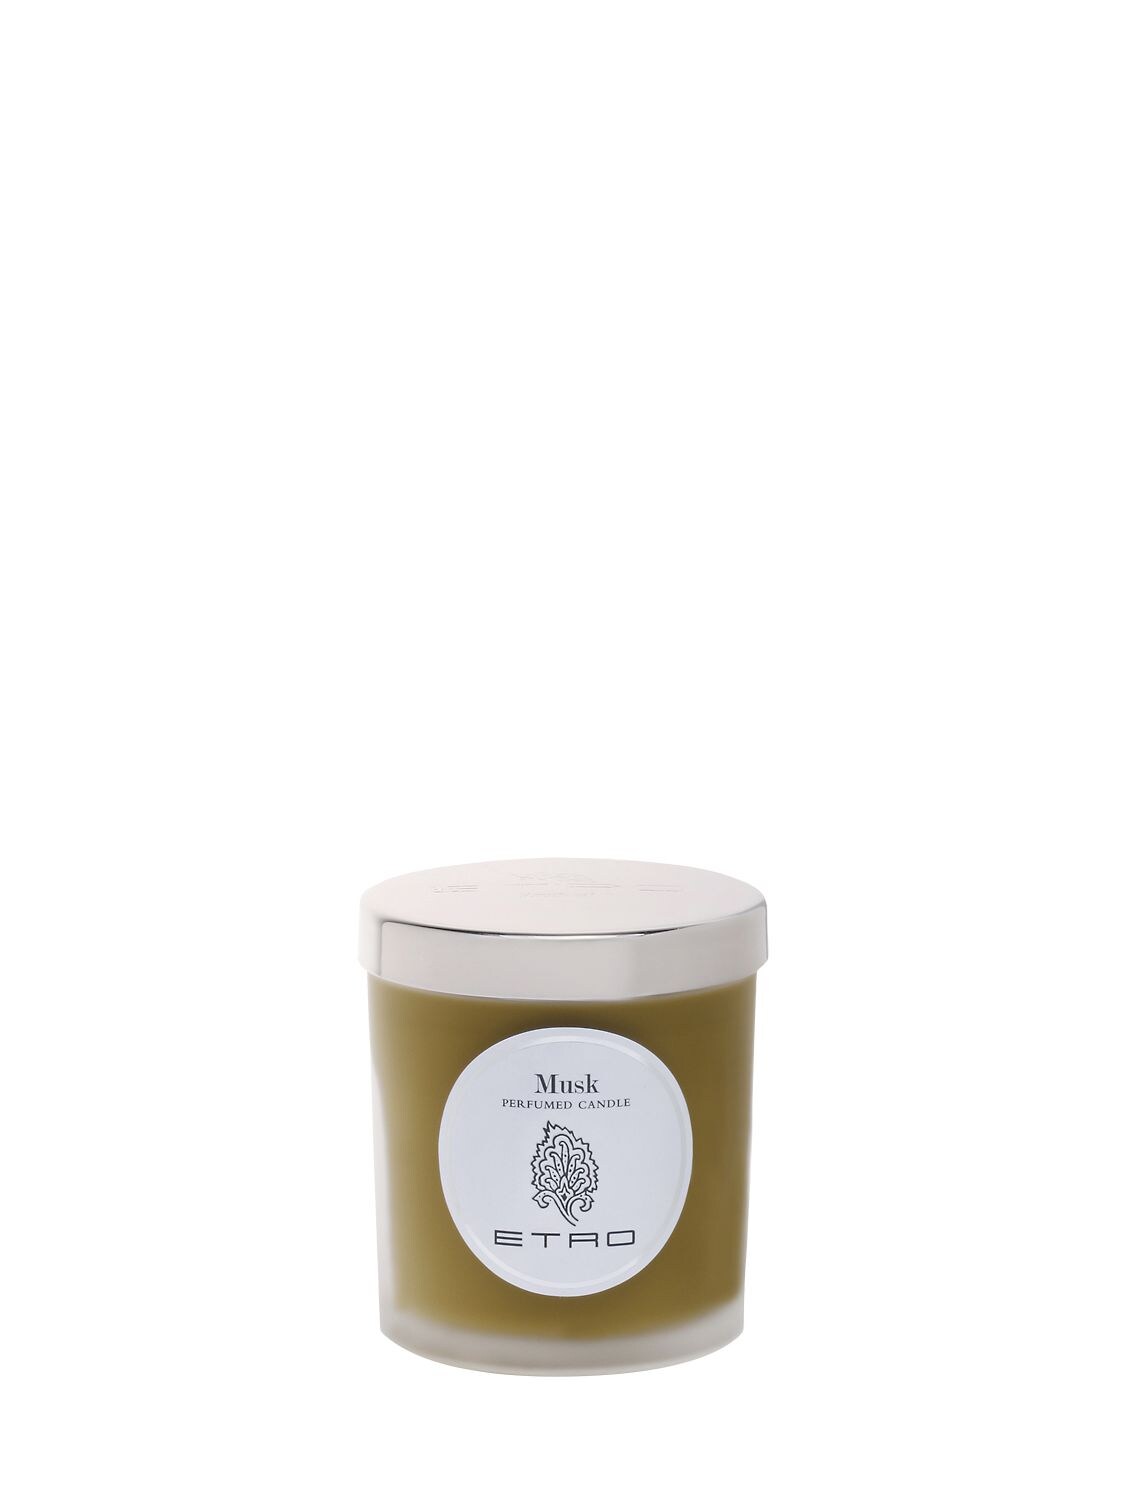 Etro Musk Scented Candle In Green